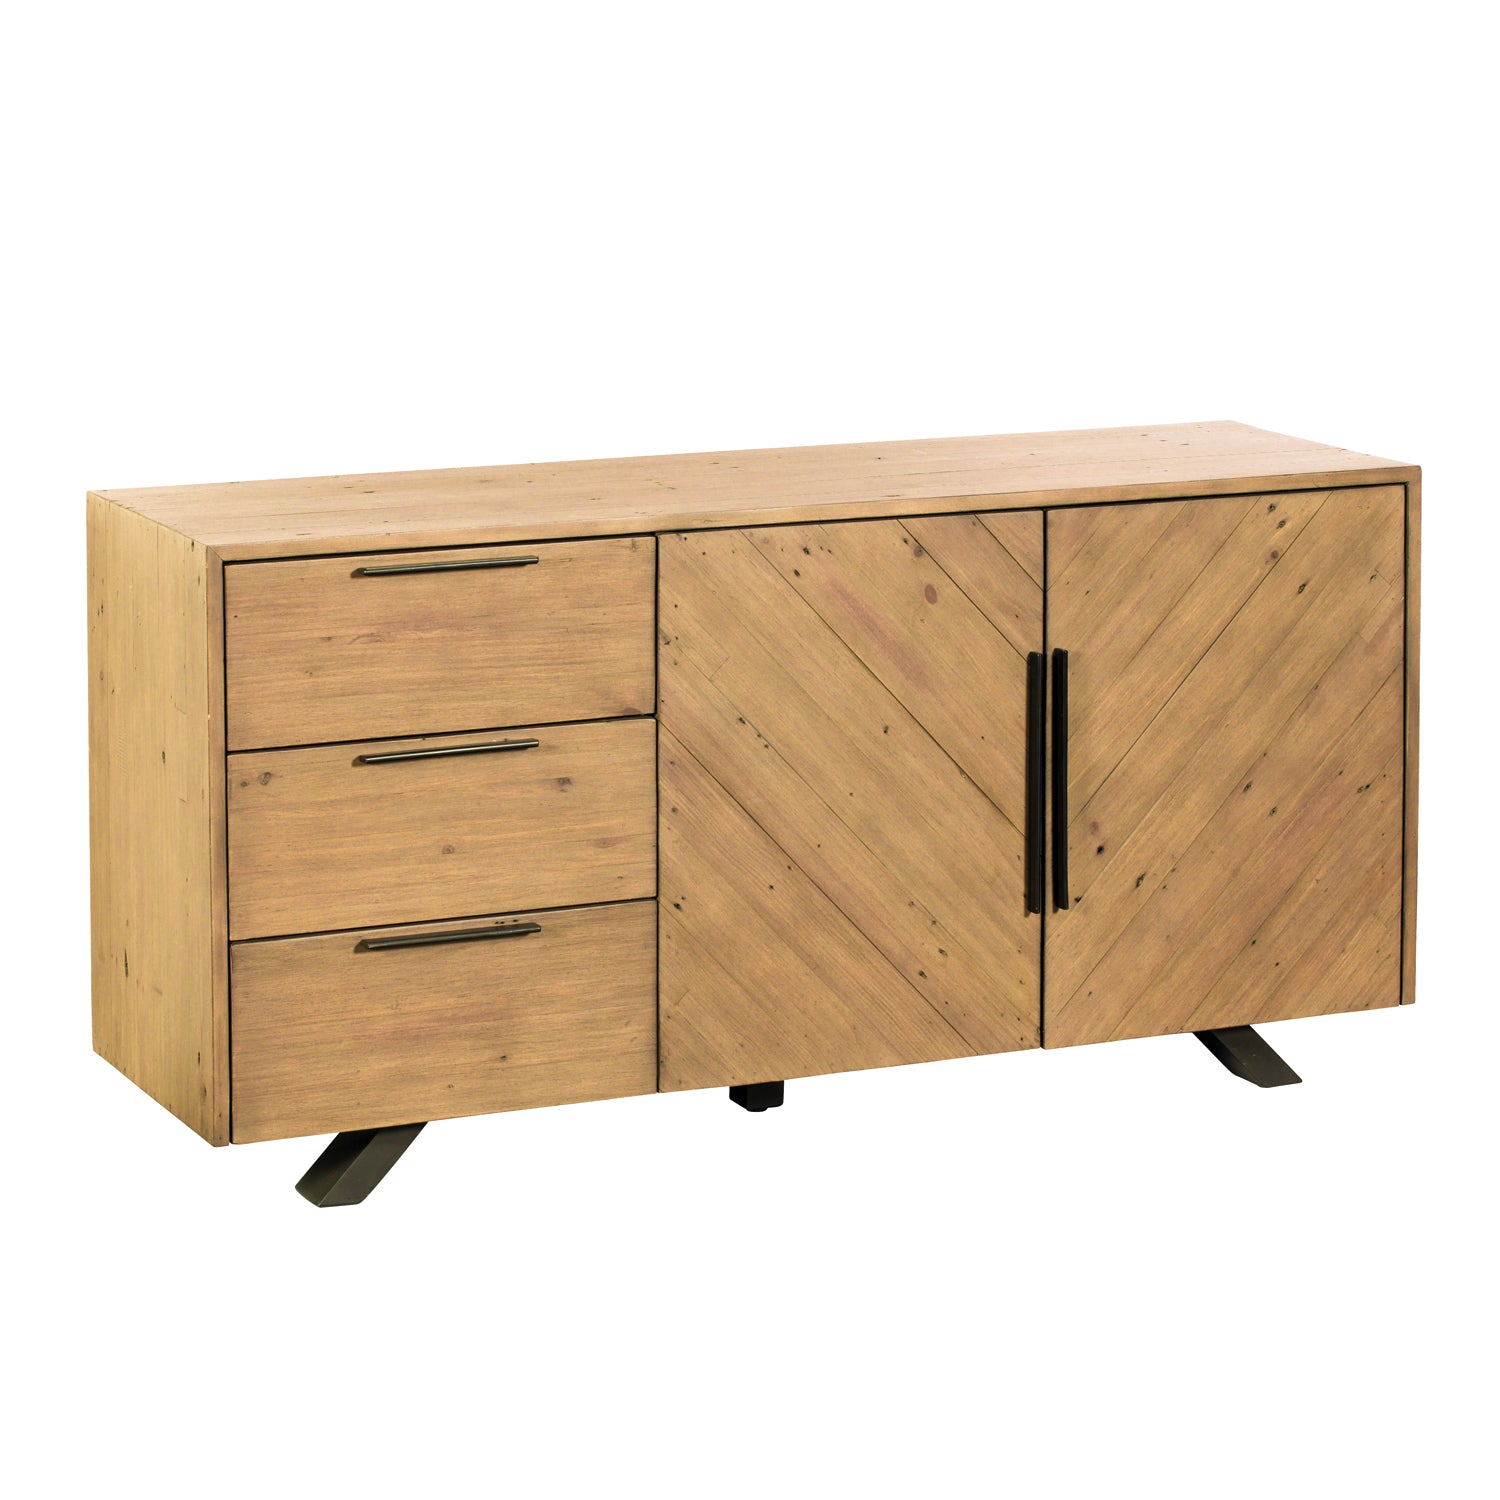 Lawrence Hill Sideboard - Wide